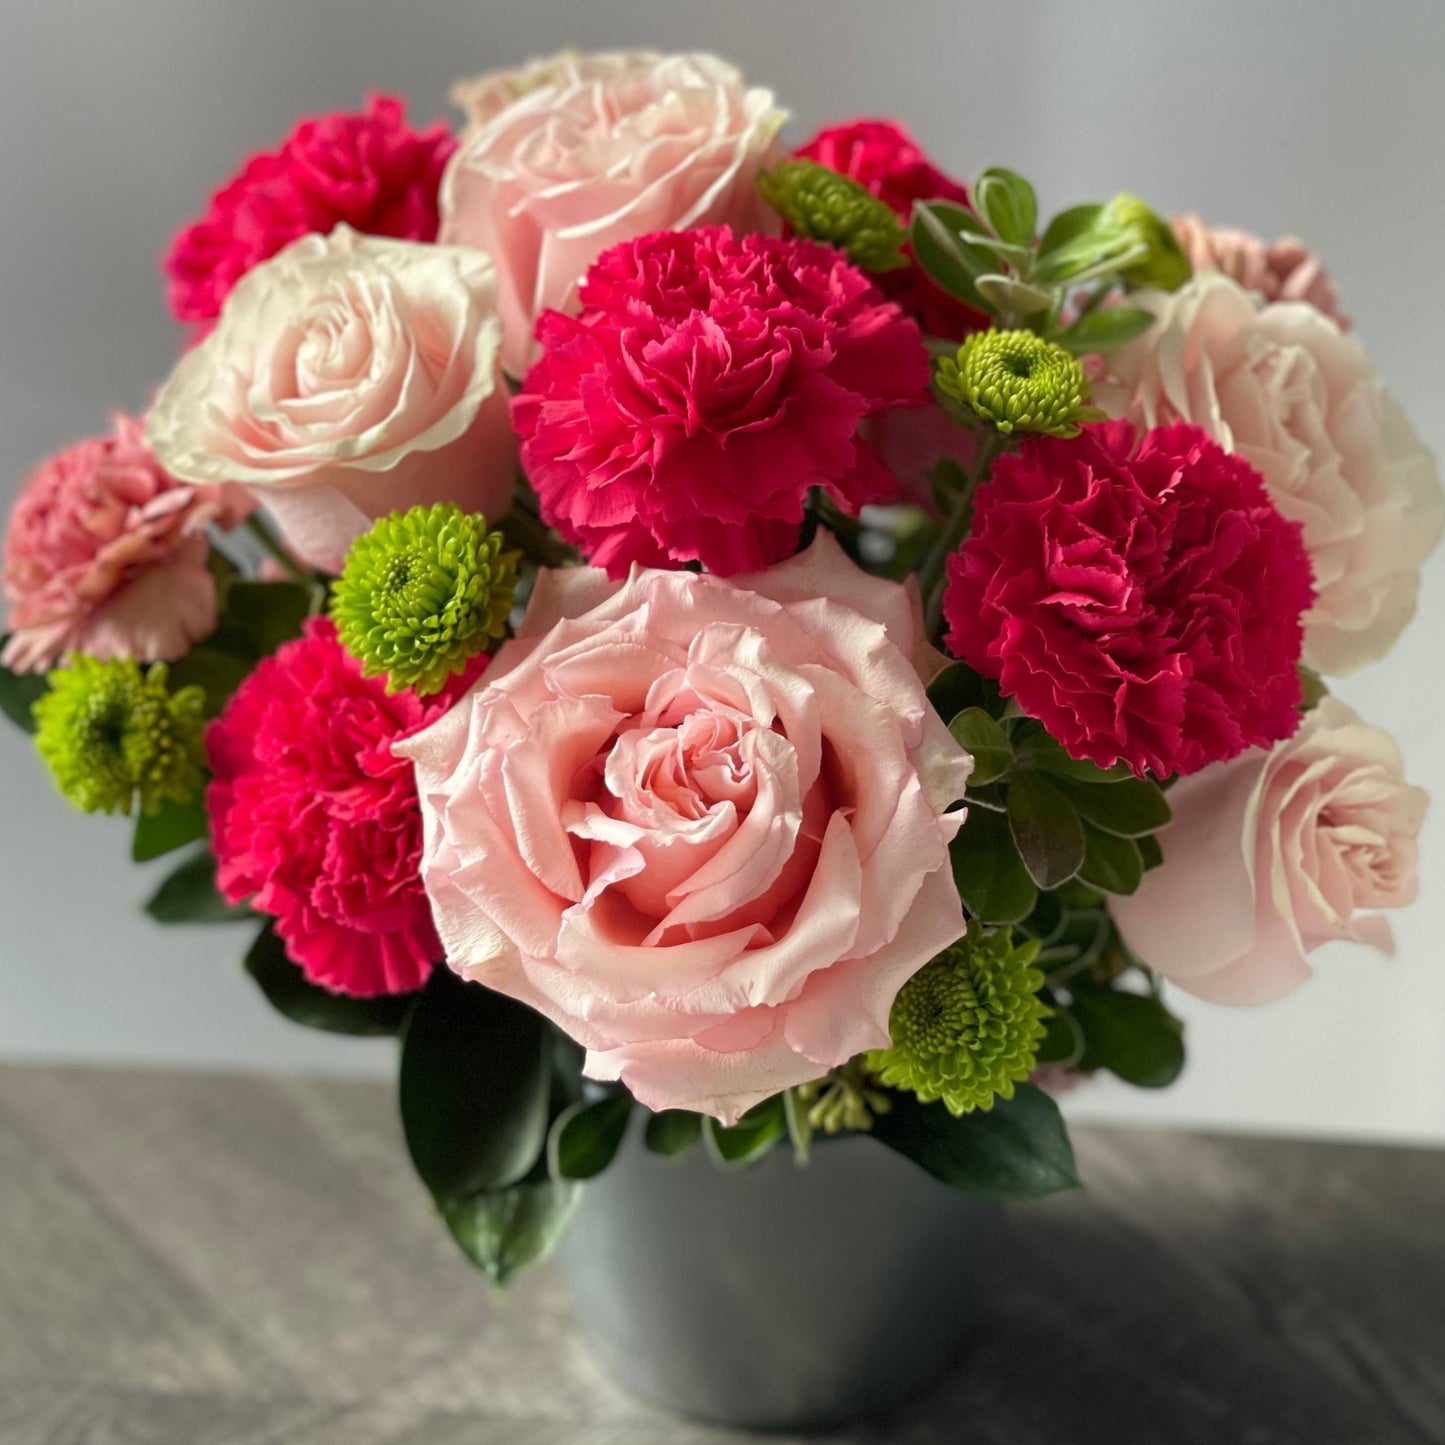 Light-pink roses, fragrant hot pink carnations, and fresh seasonal greenery with a touch of lawn-green button mums